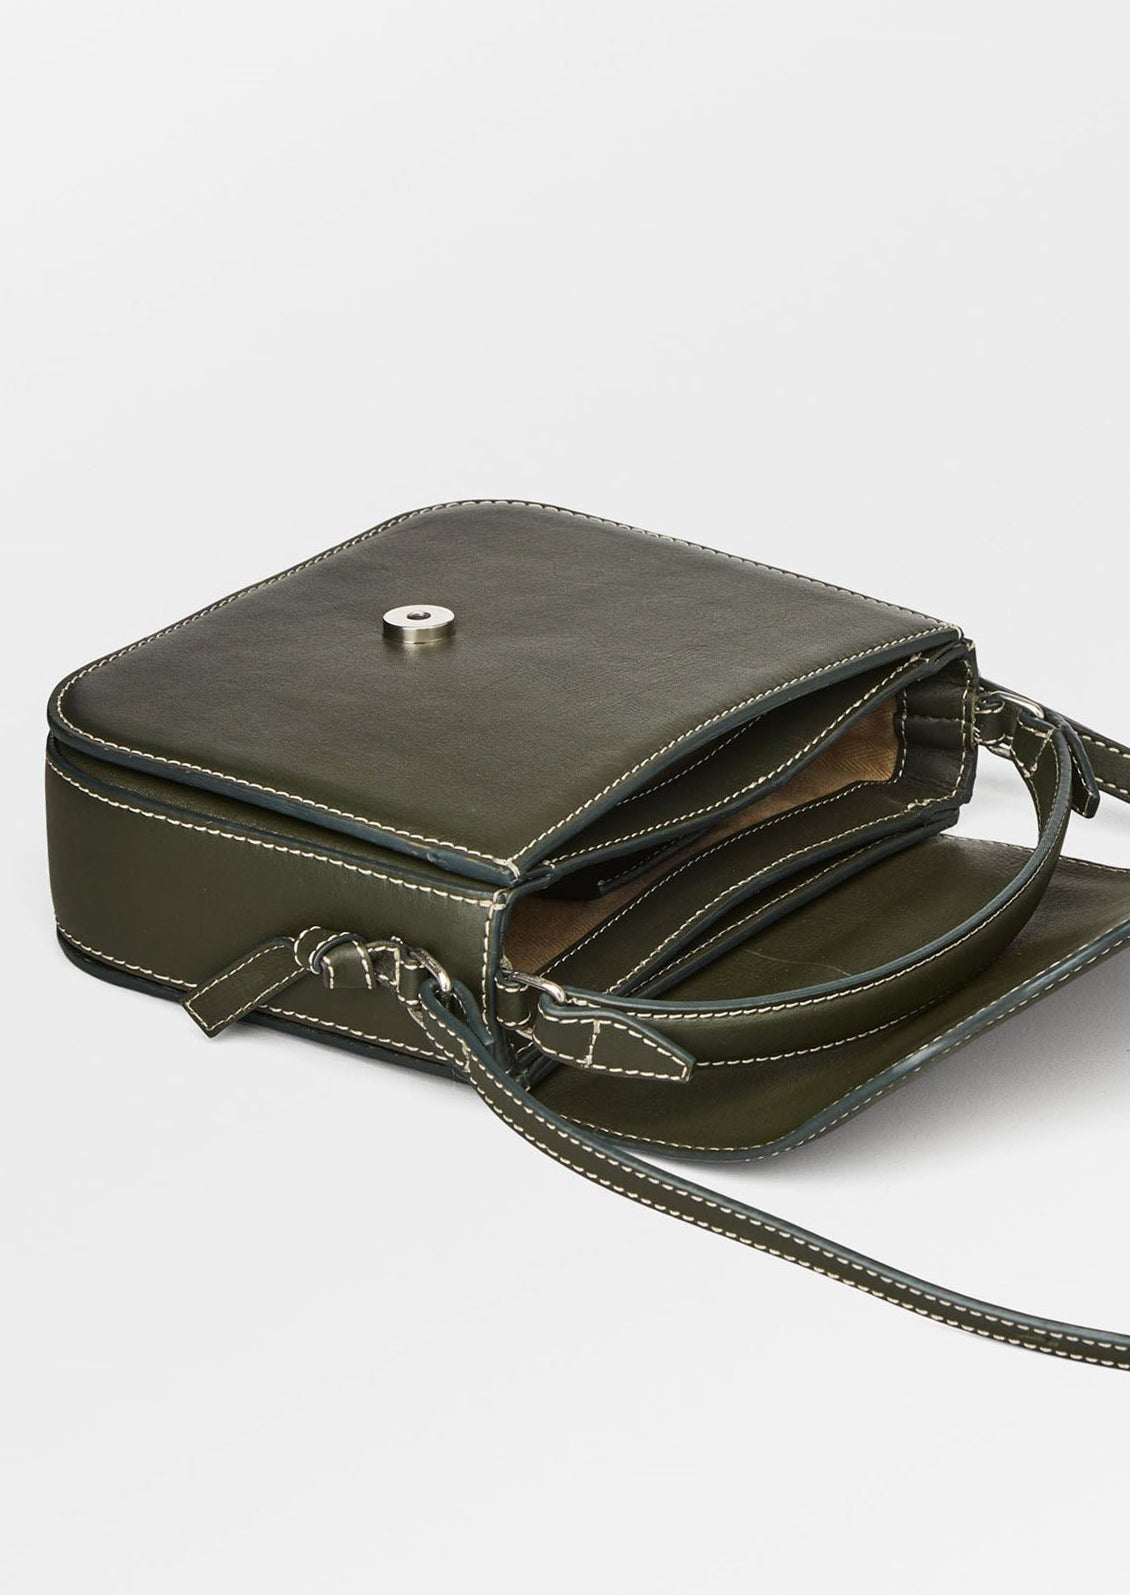 A leather handbag in khaki green with white contrast stitching and flap front design.